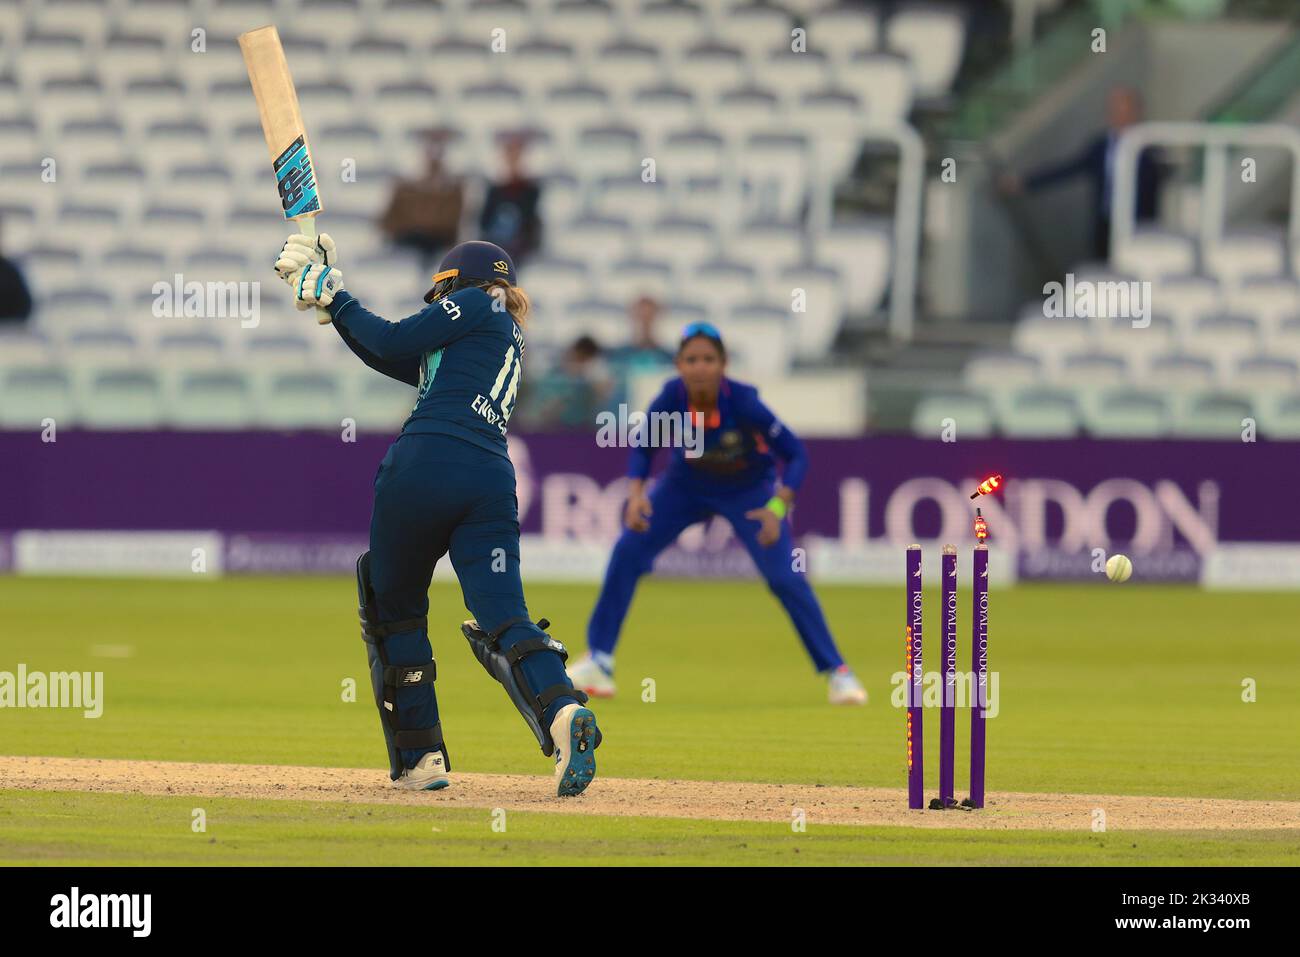 24 September , 2022, London, UK. England’s Kate Cross bowled by Jhulan Goswami as England women take on India in the 3rd Royal London One Day International at Lords. David Rowe/Alamy Live News. Stock Photo